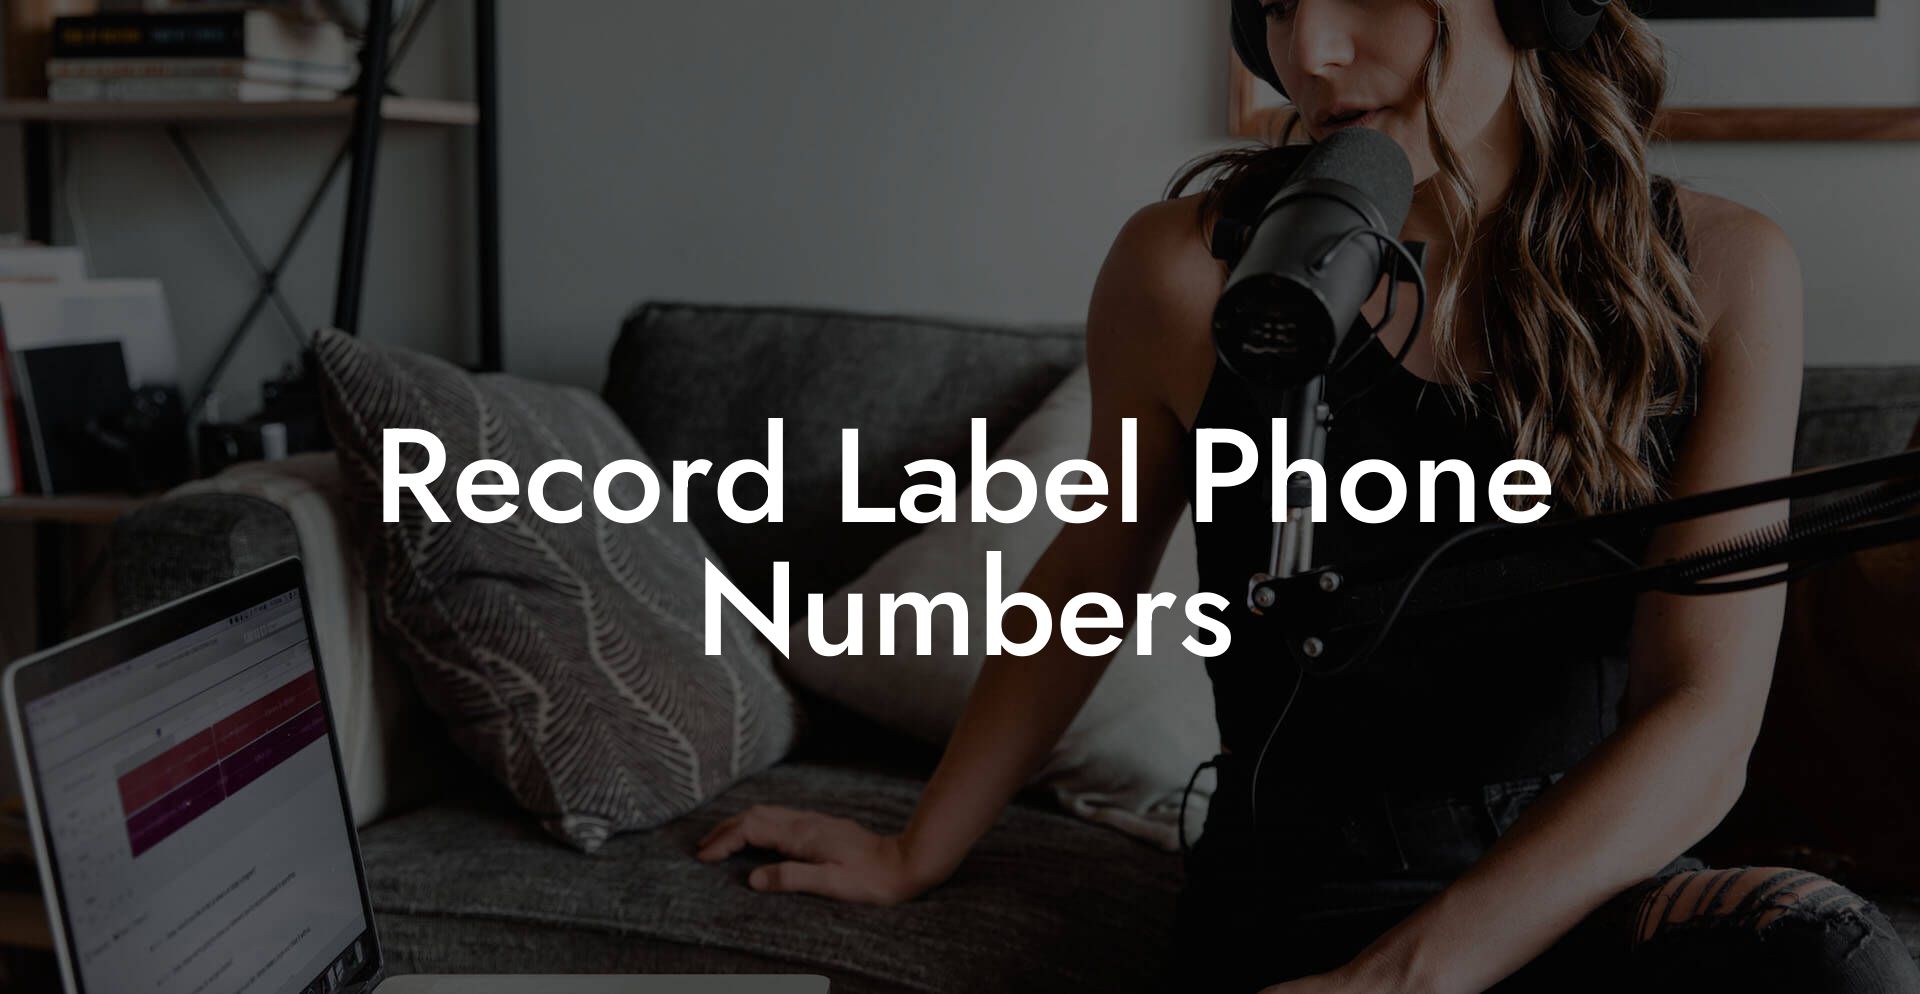 Record Label Phone Numbers